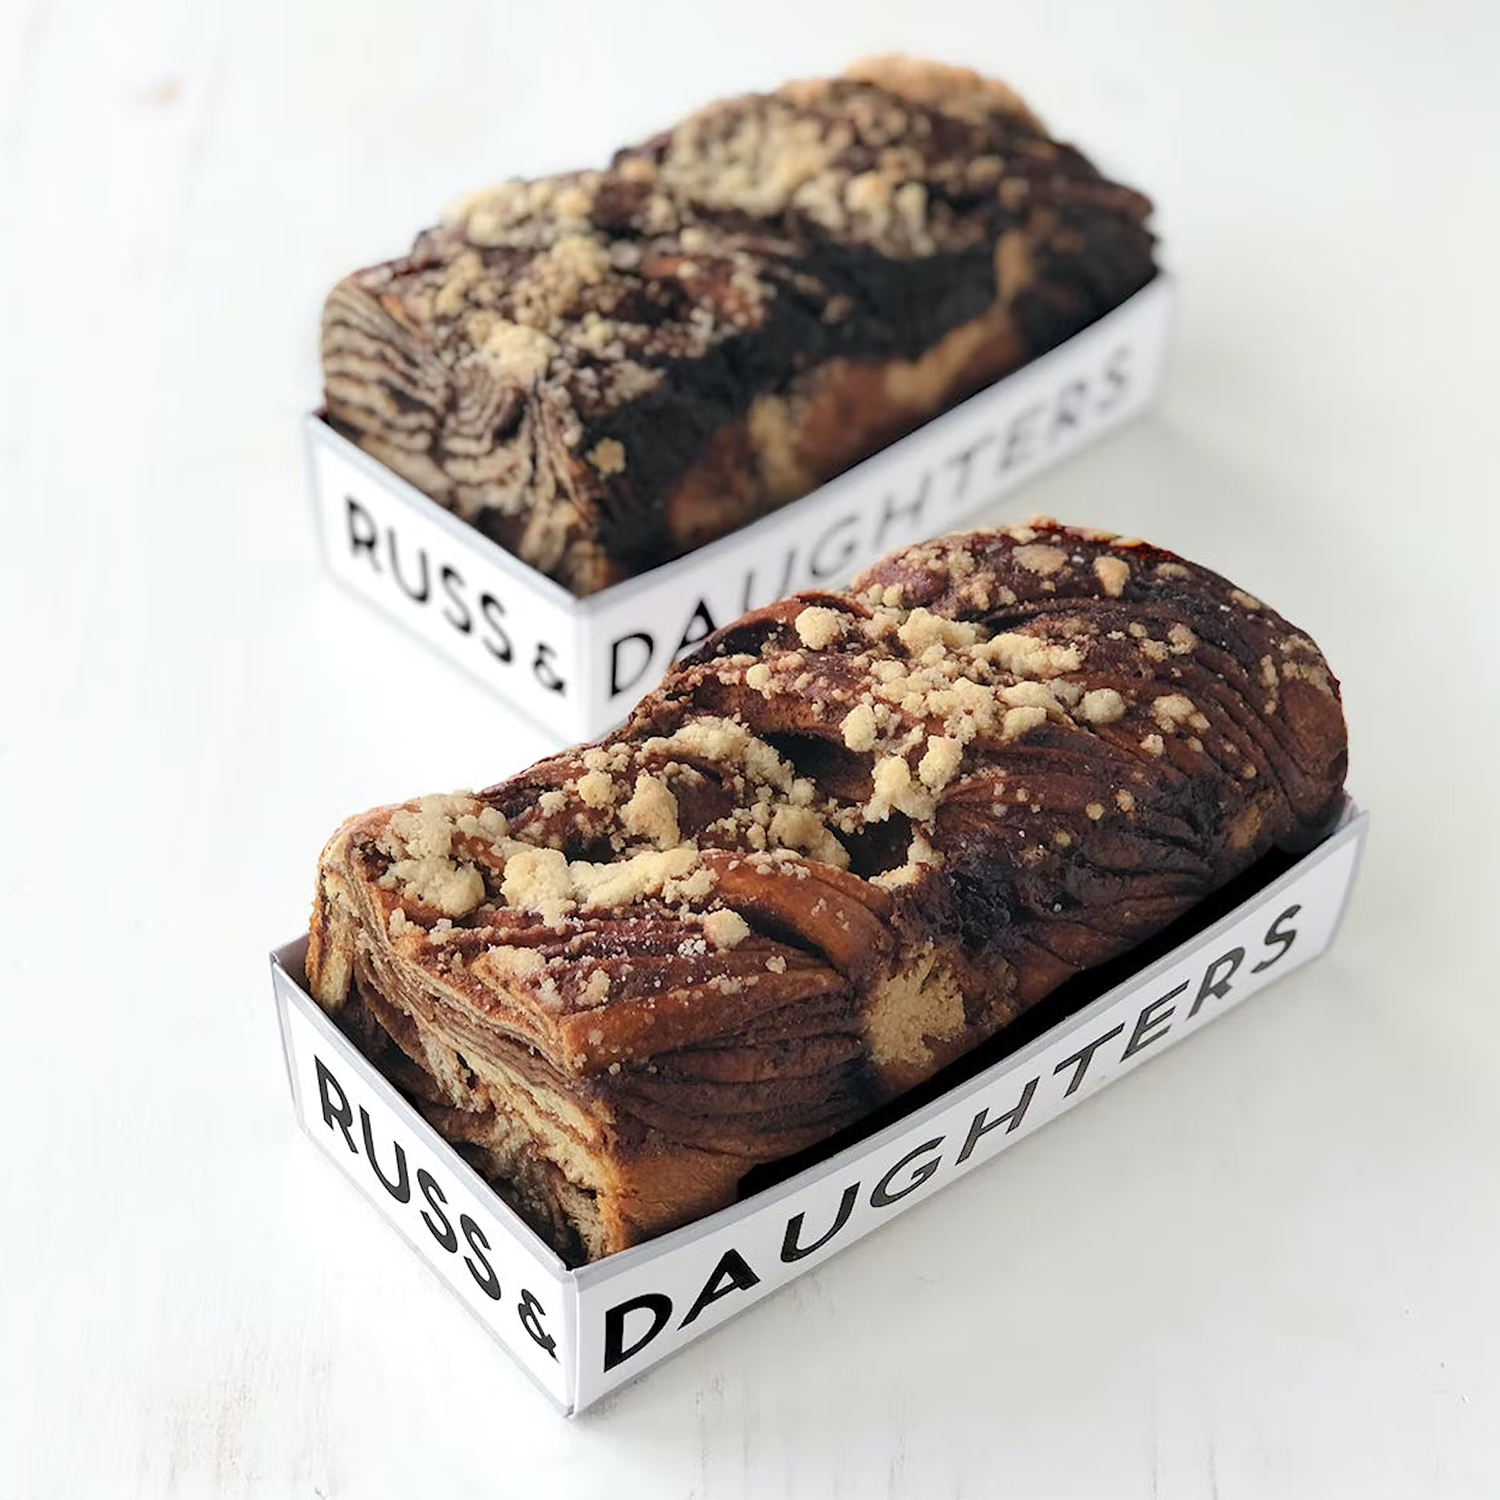 two chocolate babka from Russ & Daughters